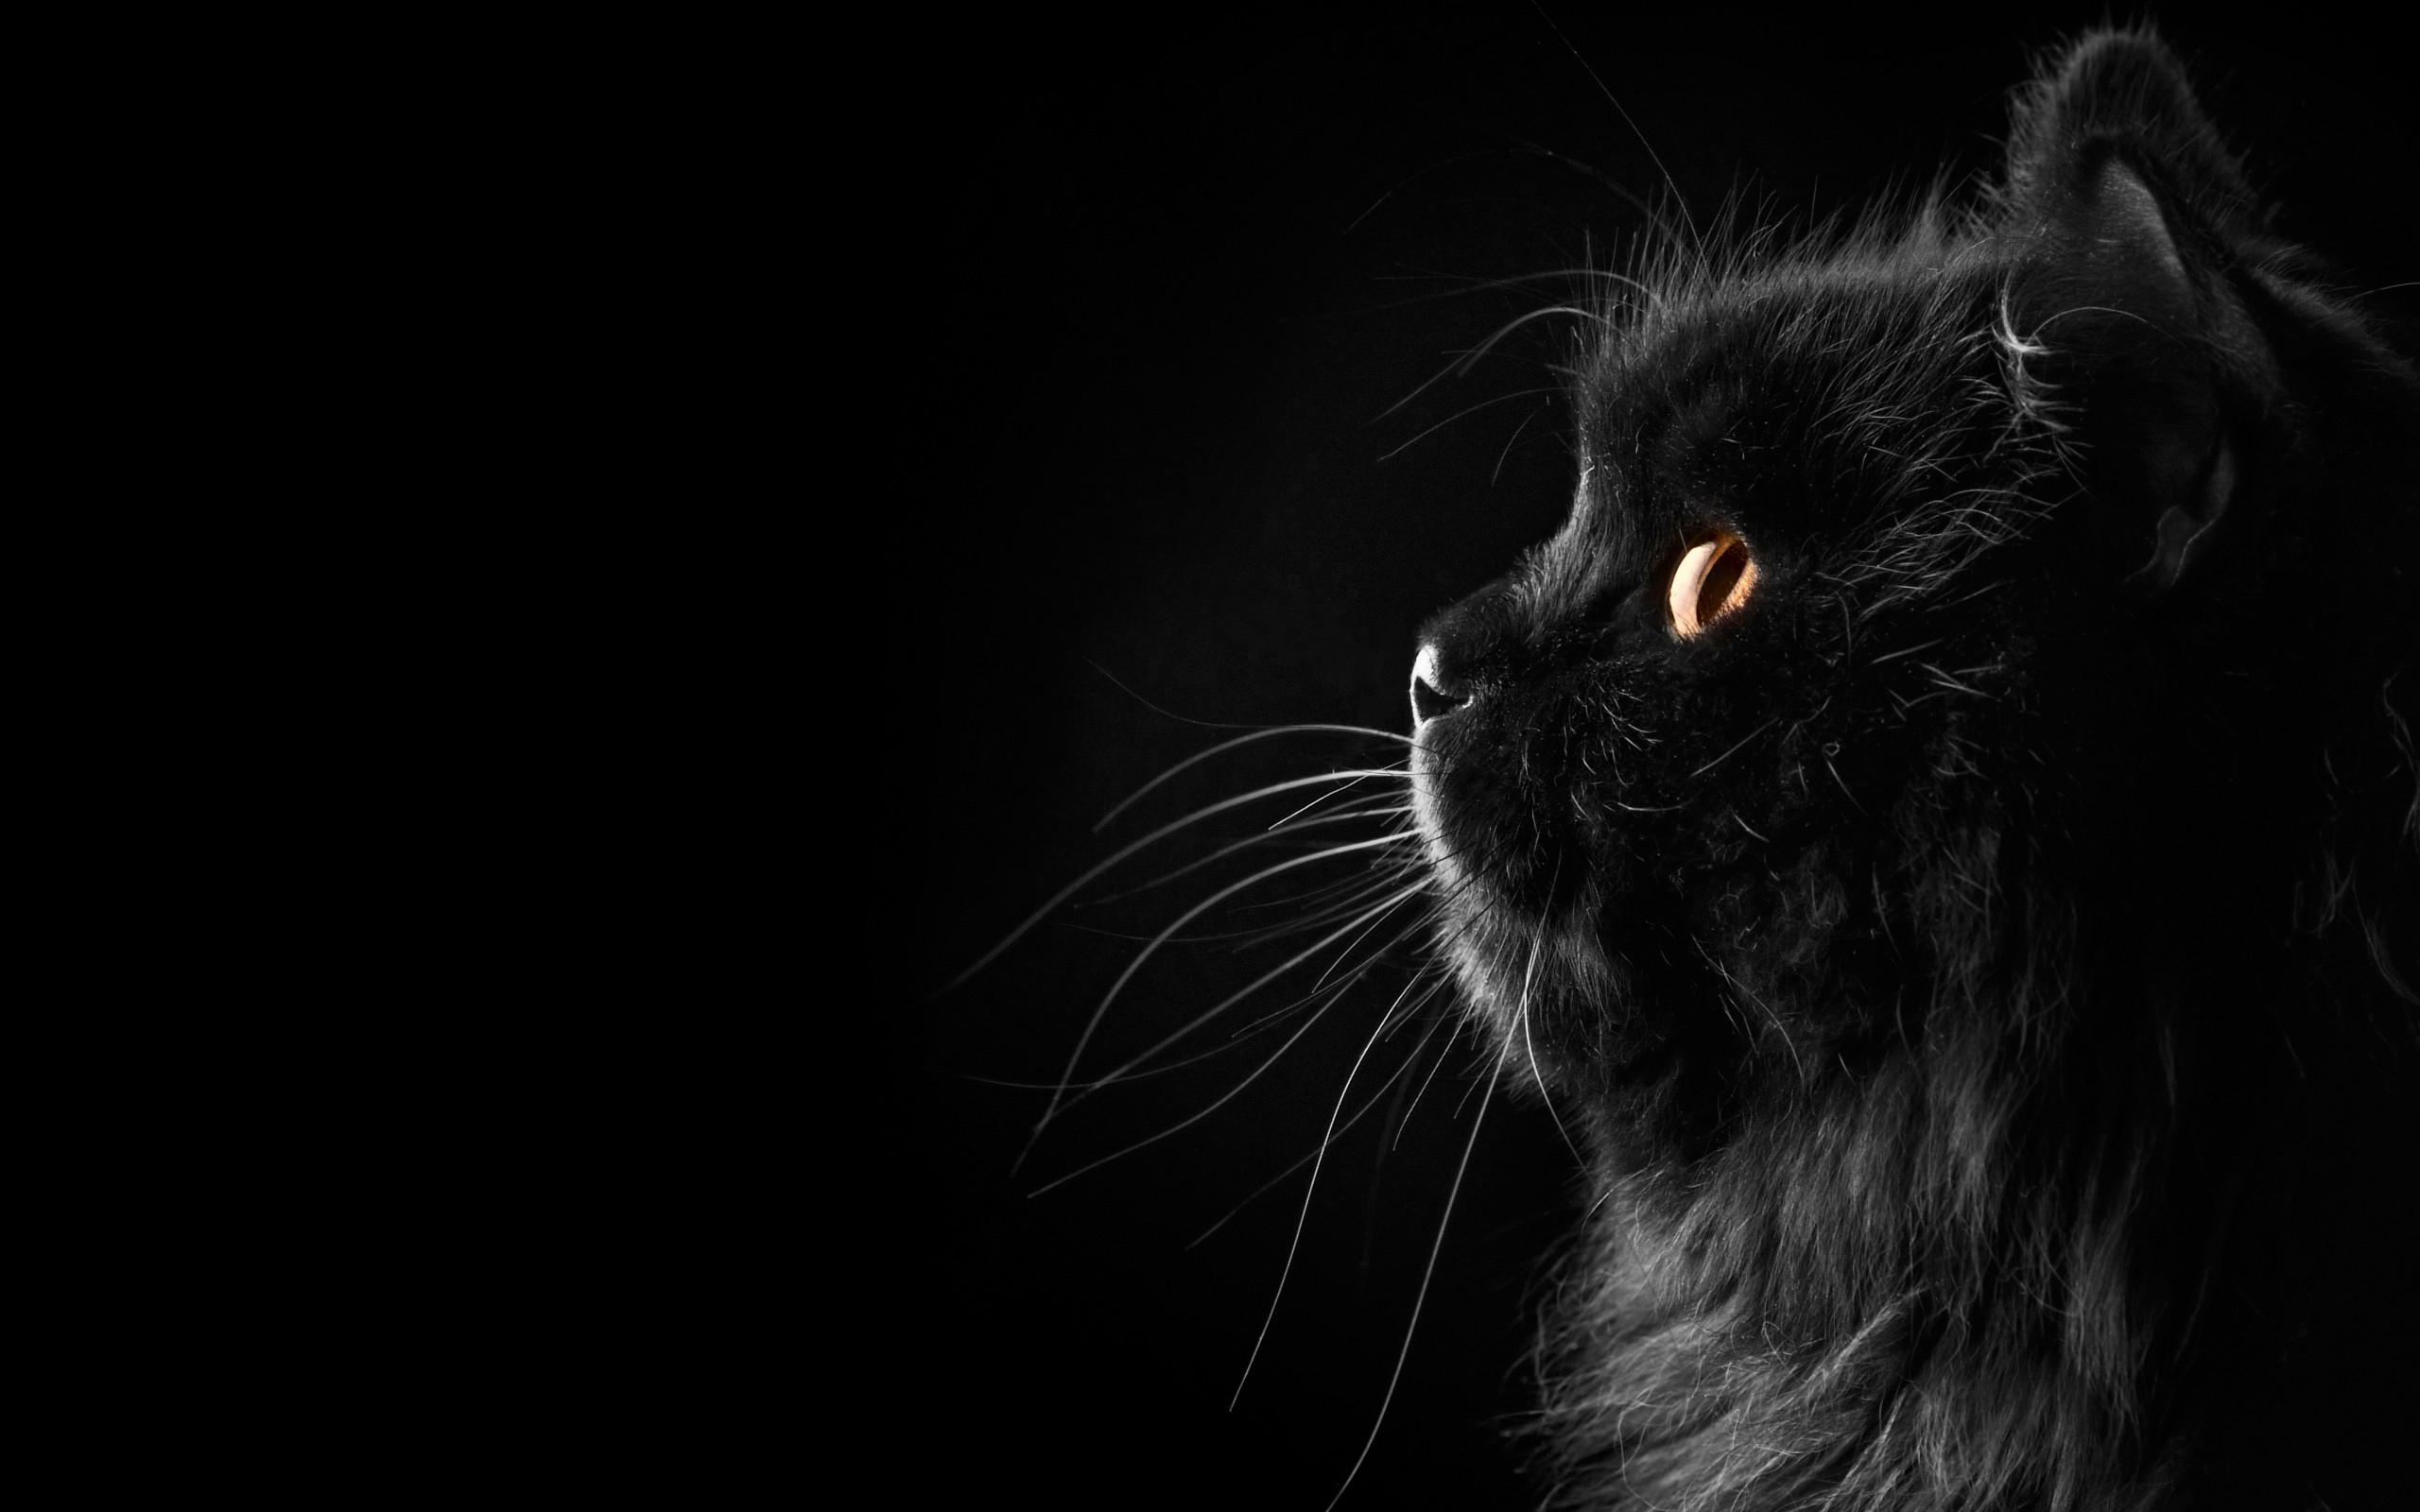 Download wallpaper Cat, Black background, Background, Black, Cat, Fon,  Silhouette, section cats in resolution 2560x1600